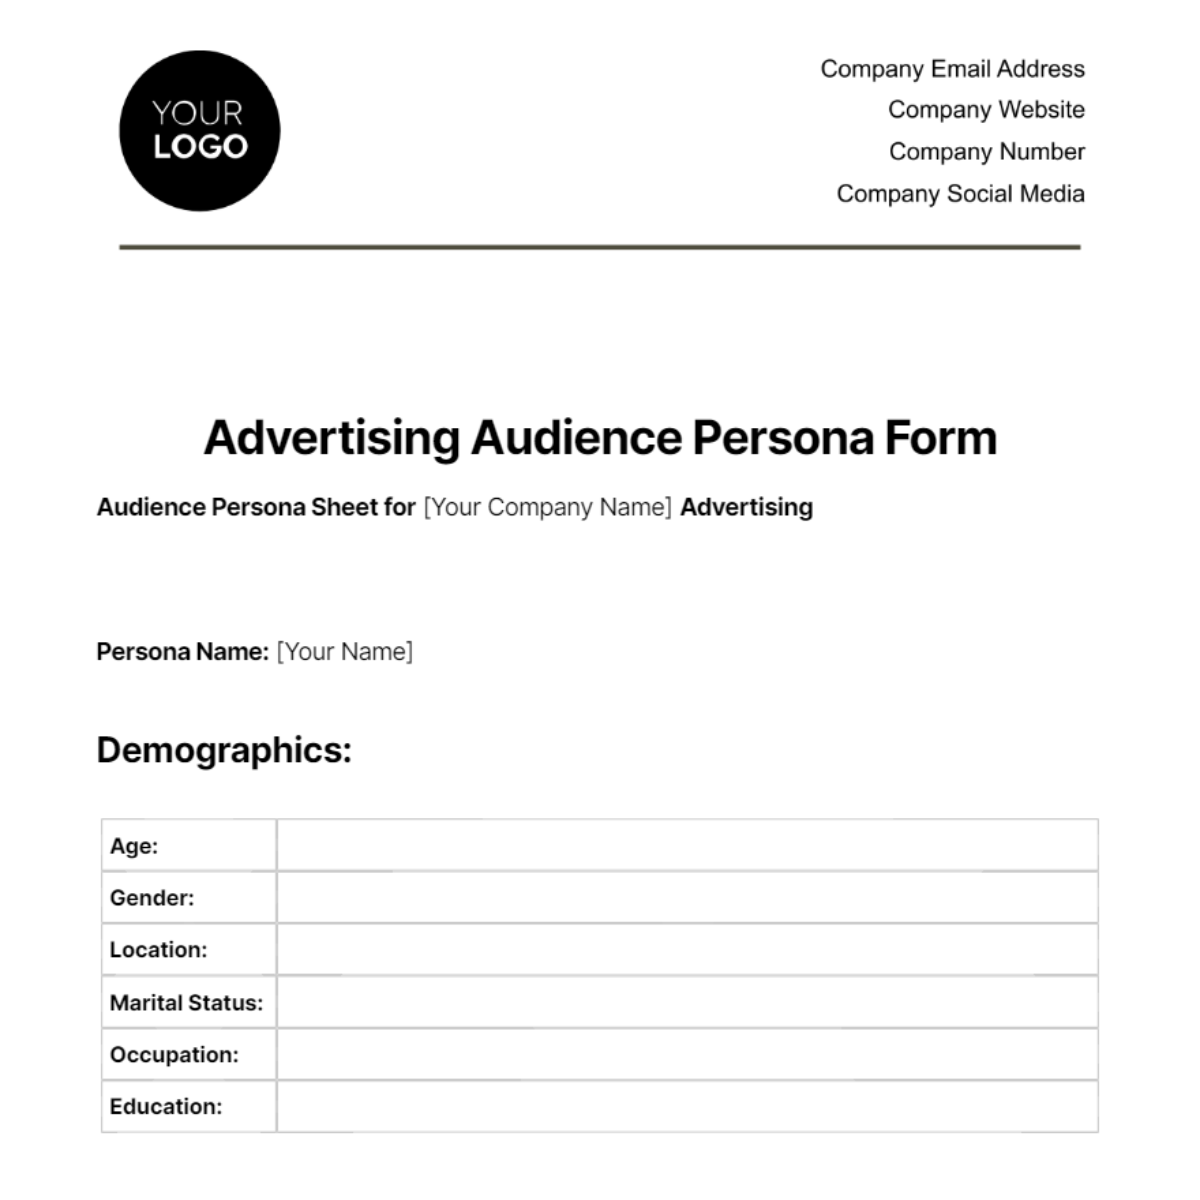 Free Advertising Audience Persona Form Template